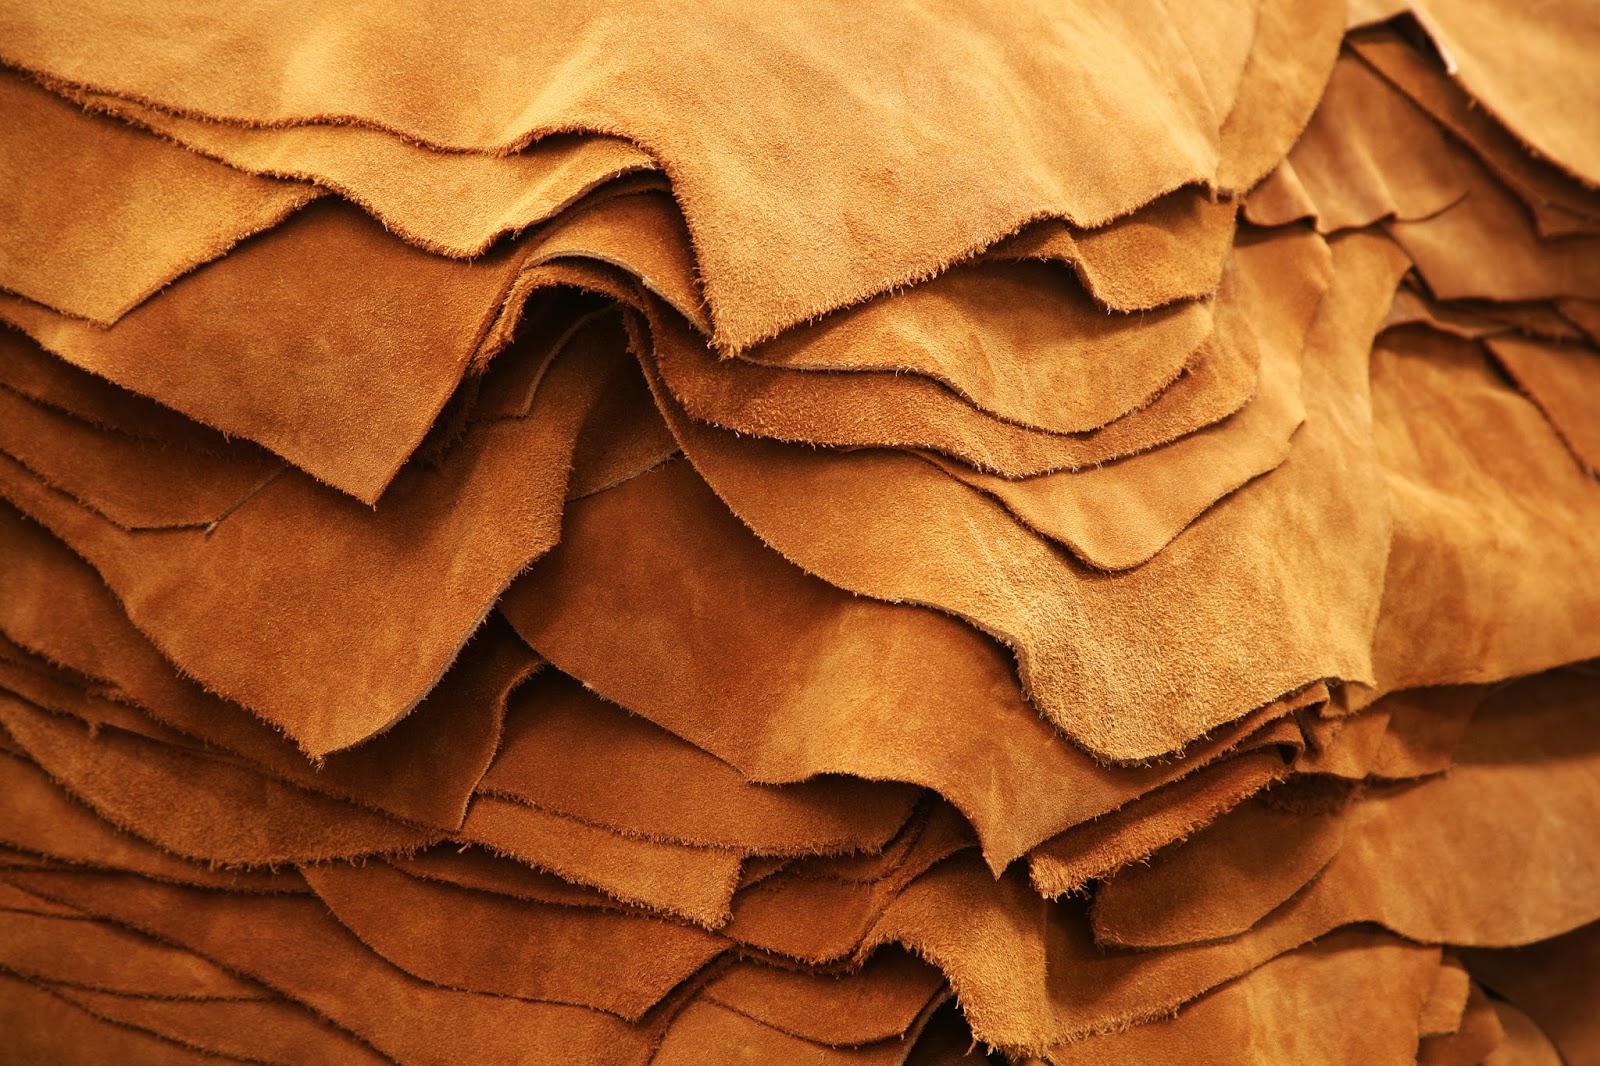 Leather-making: The horrifying facts and green solutions - Follow Green